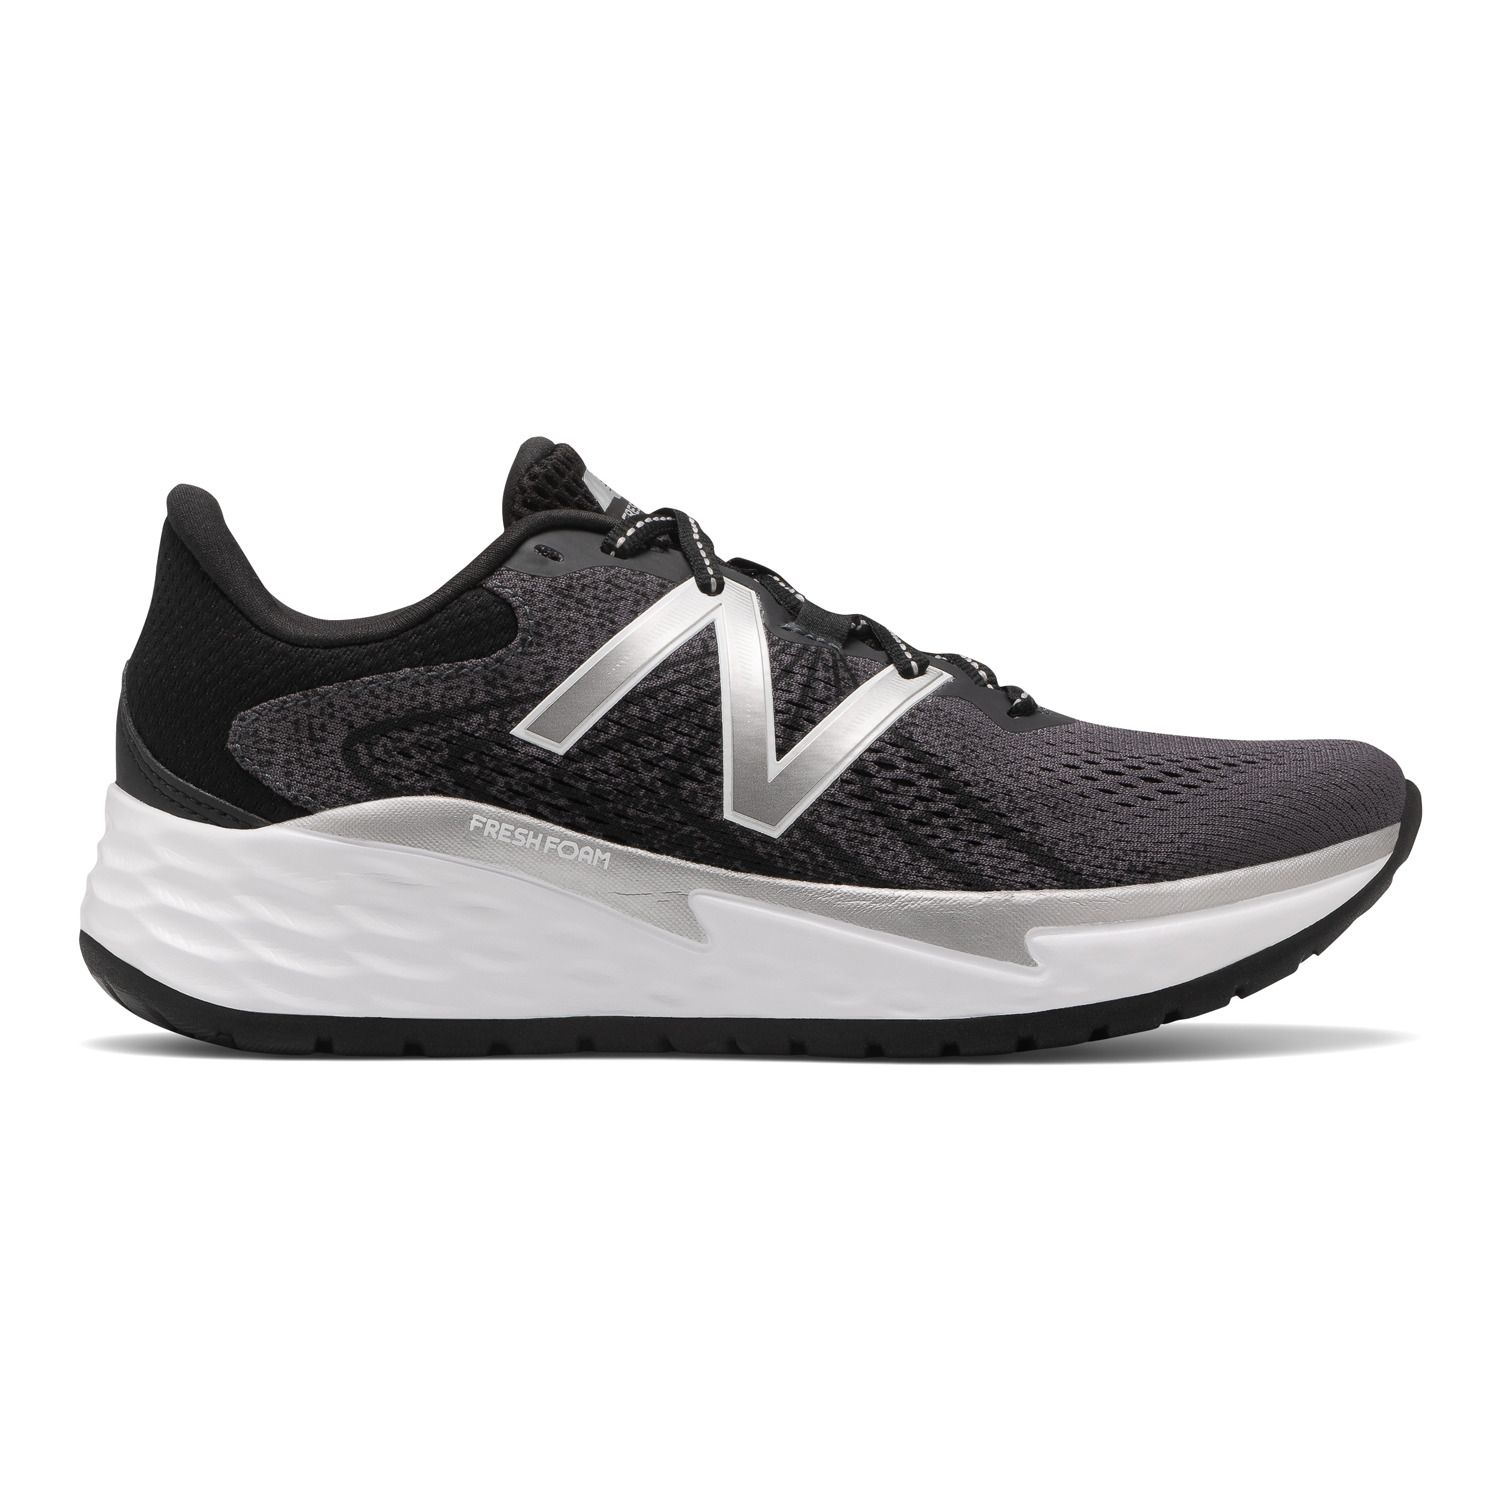 new balance 460 womens running shoes lace up